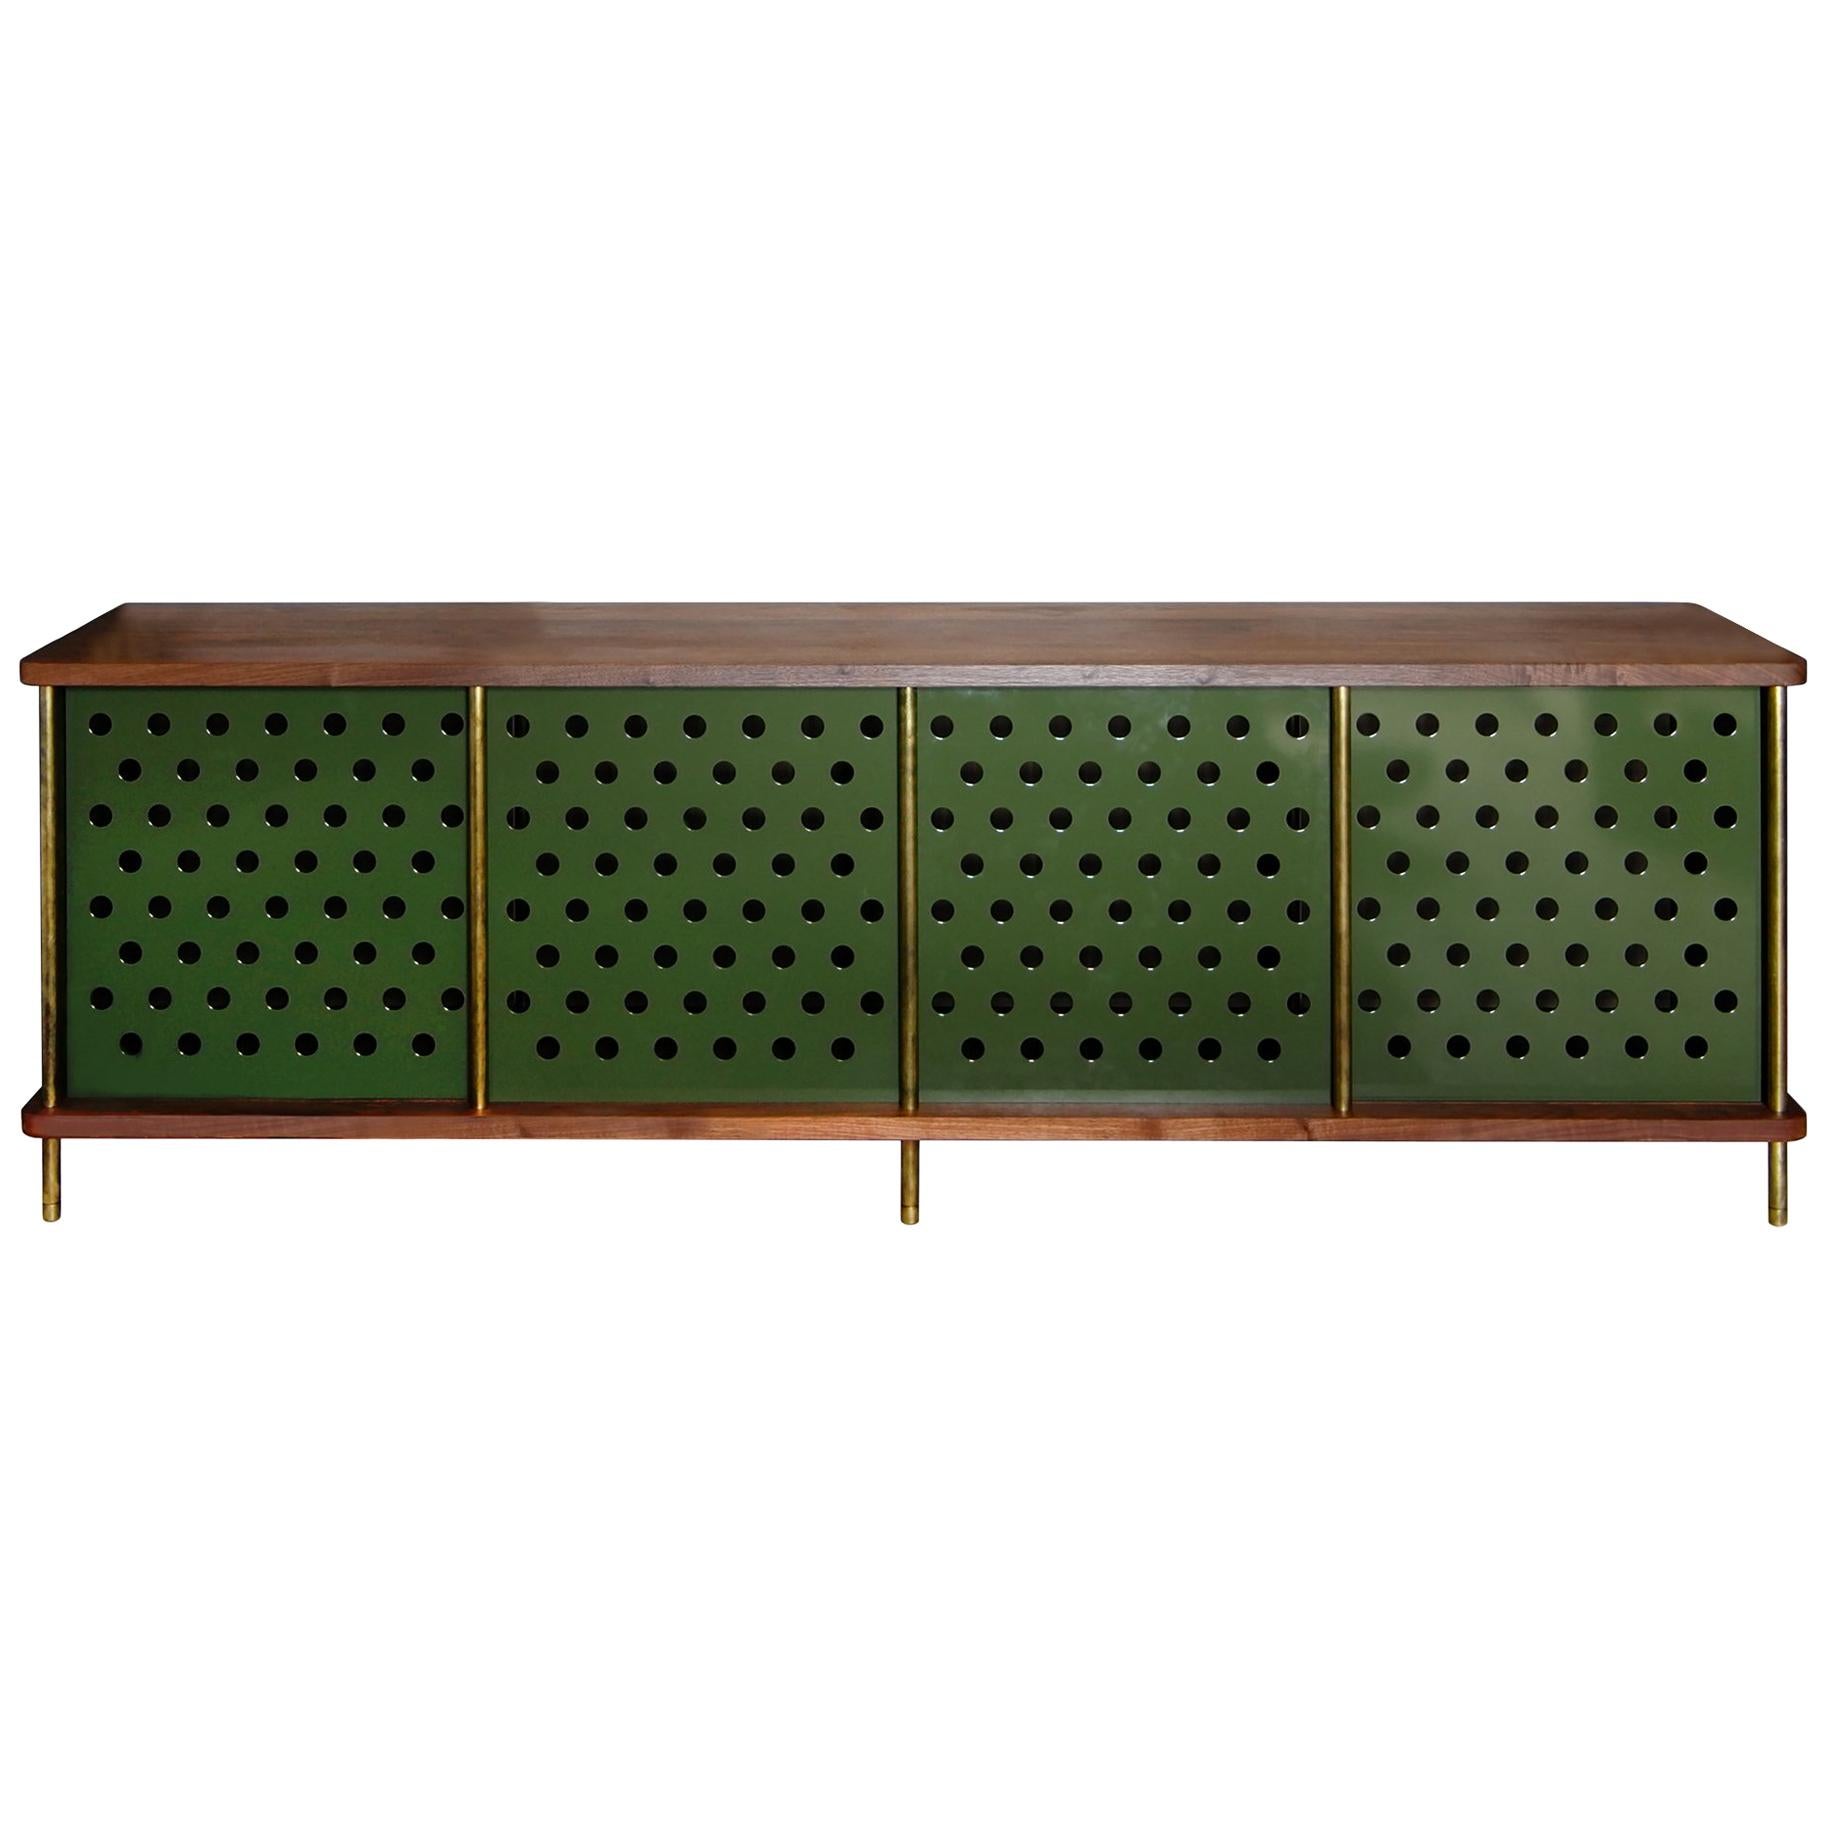 4 Door Strata Credenza with No Top Shelves in Walnut and Brass by Fort Standard